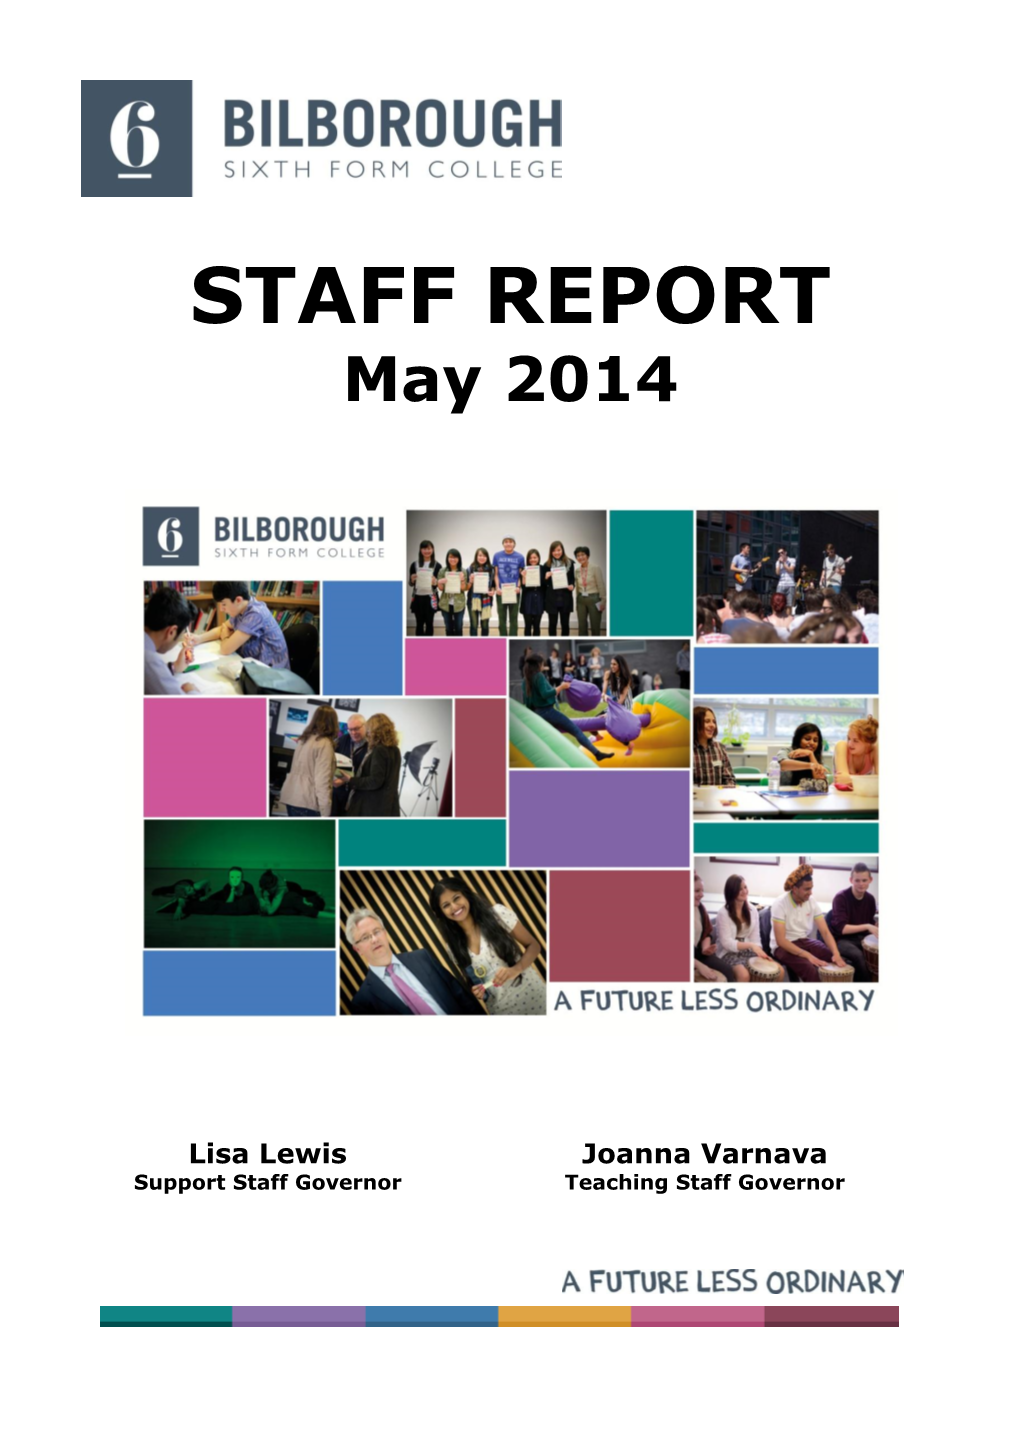 STAFF REPORT May 2014